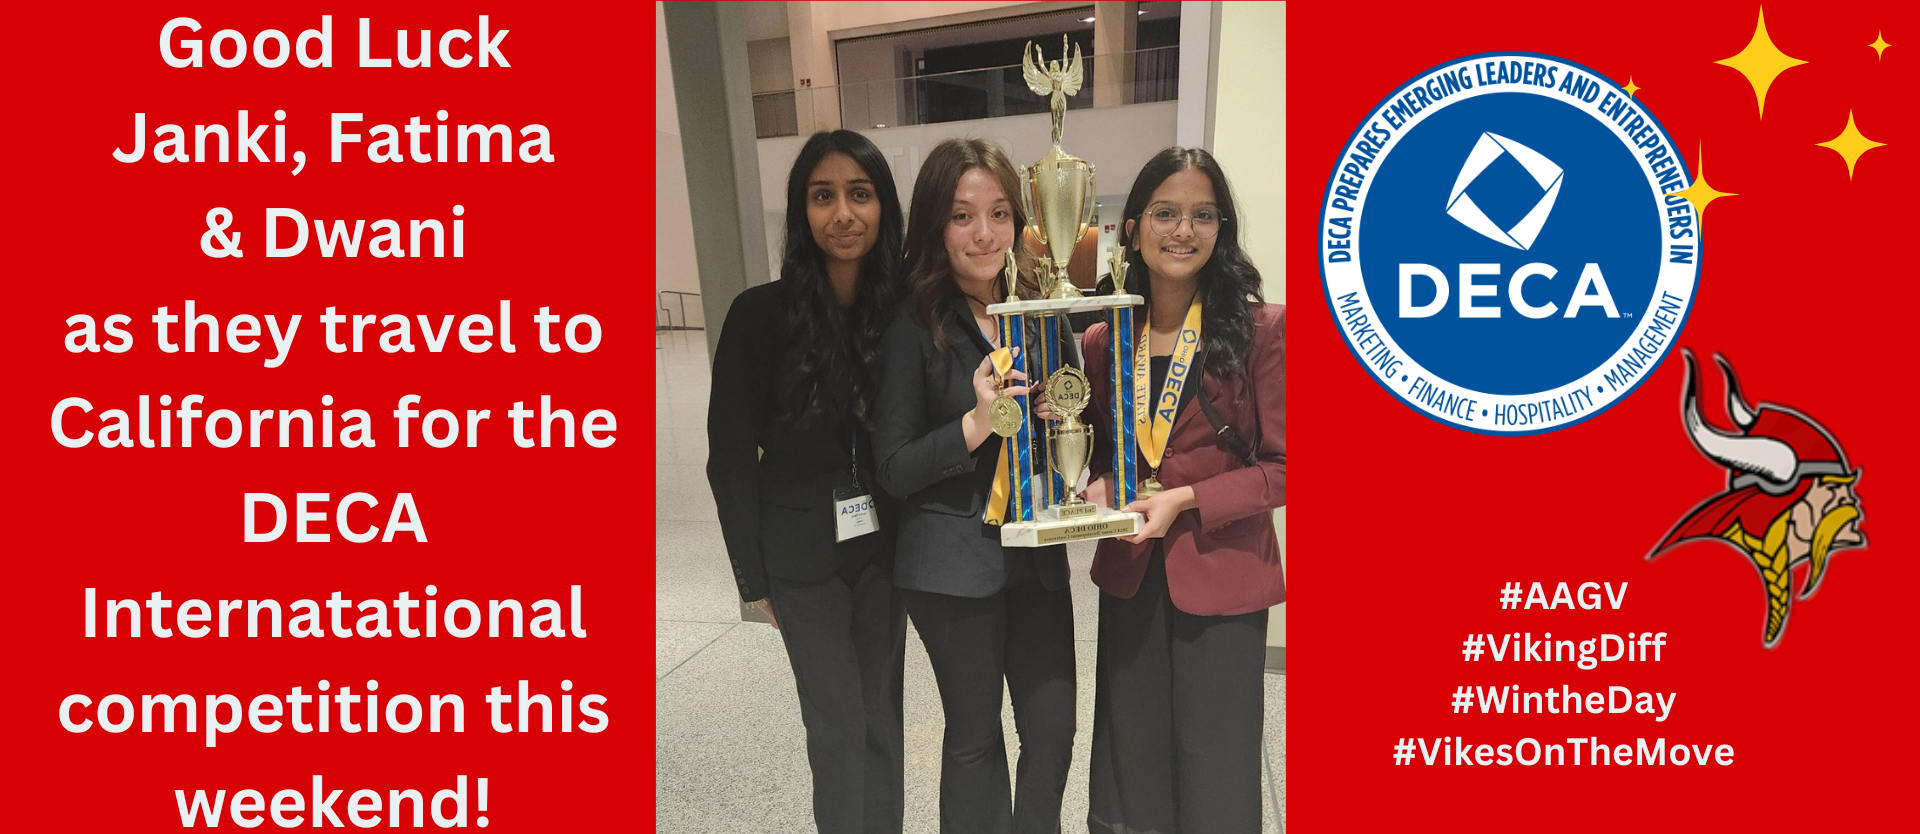 DECA Travels to California for International Competition